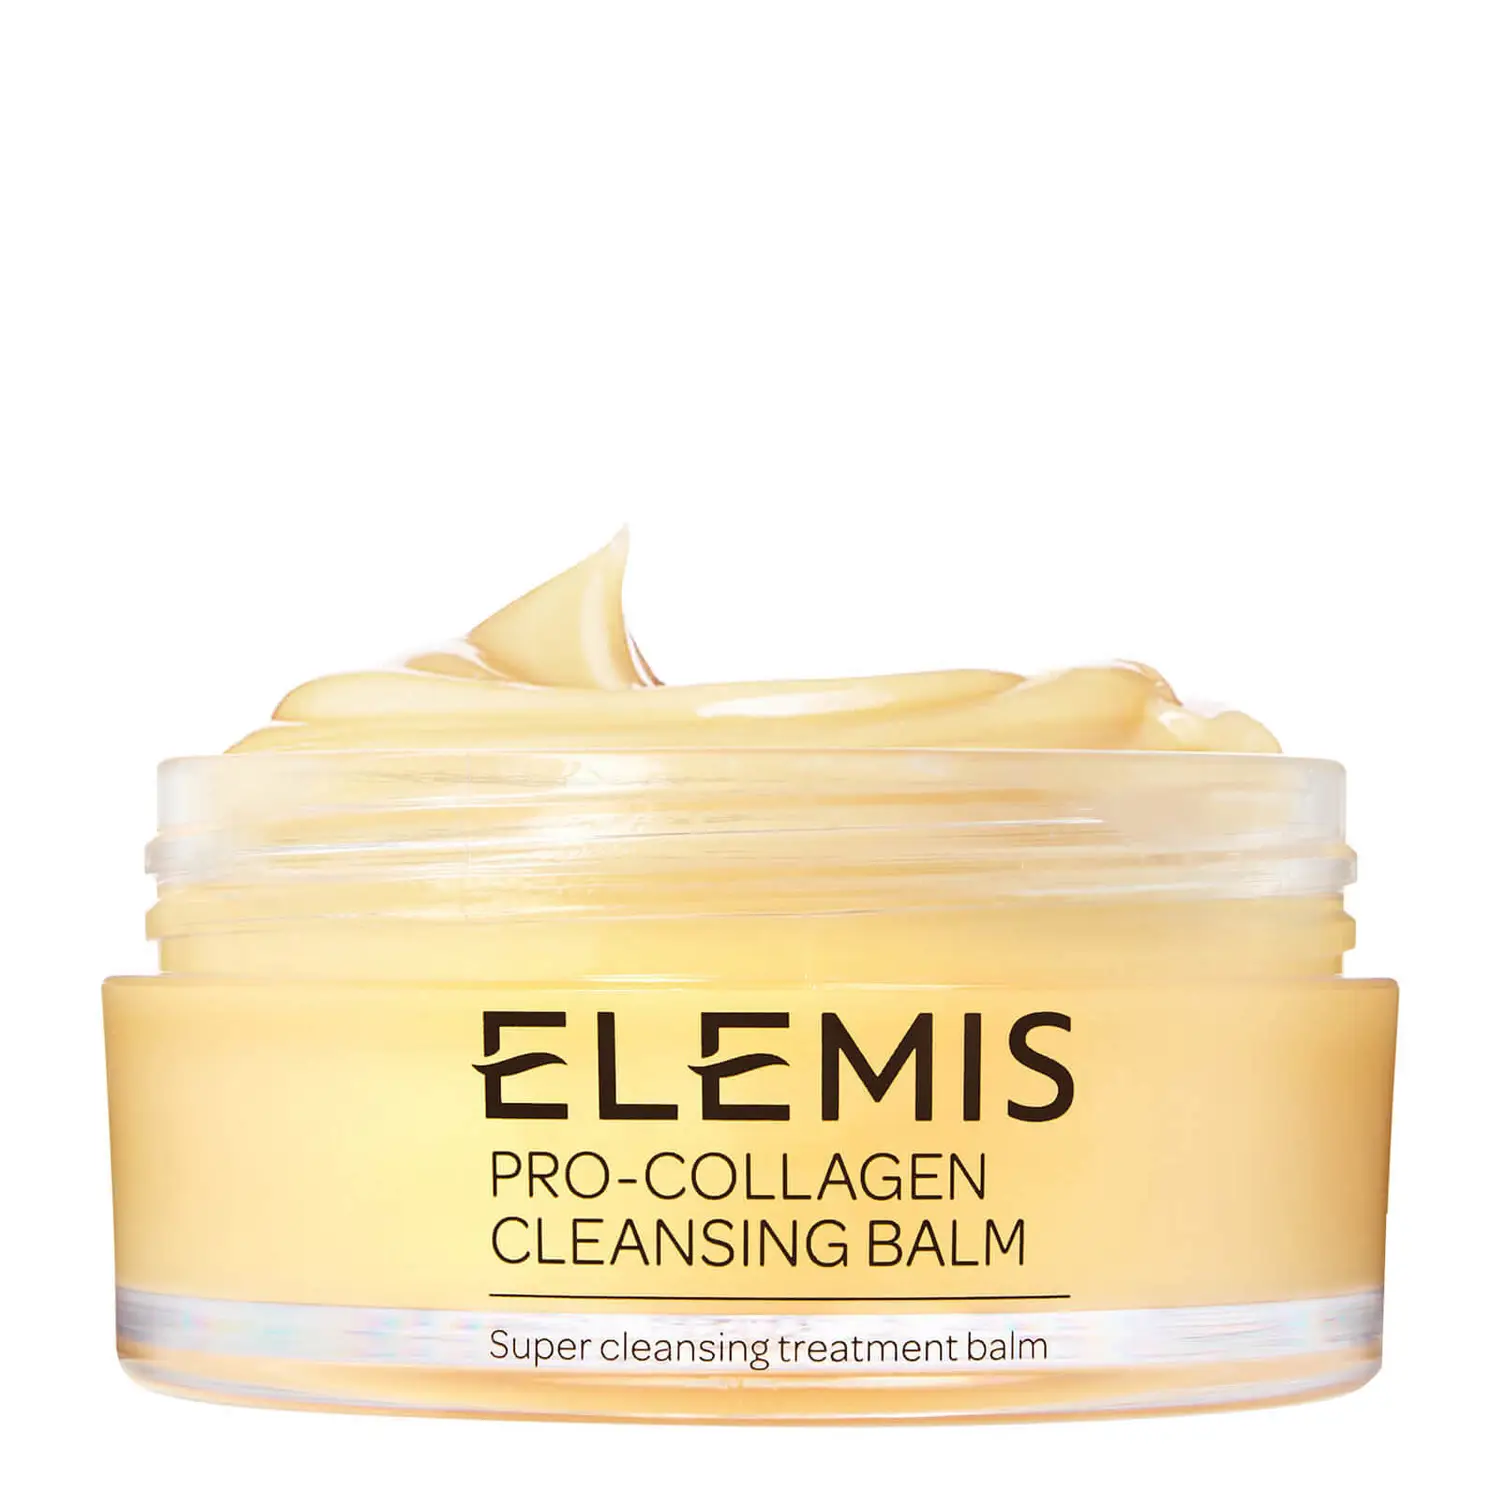 How to use the Elemis Pro-Collagen Cleansing Balm for the ultimate cleanse